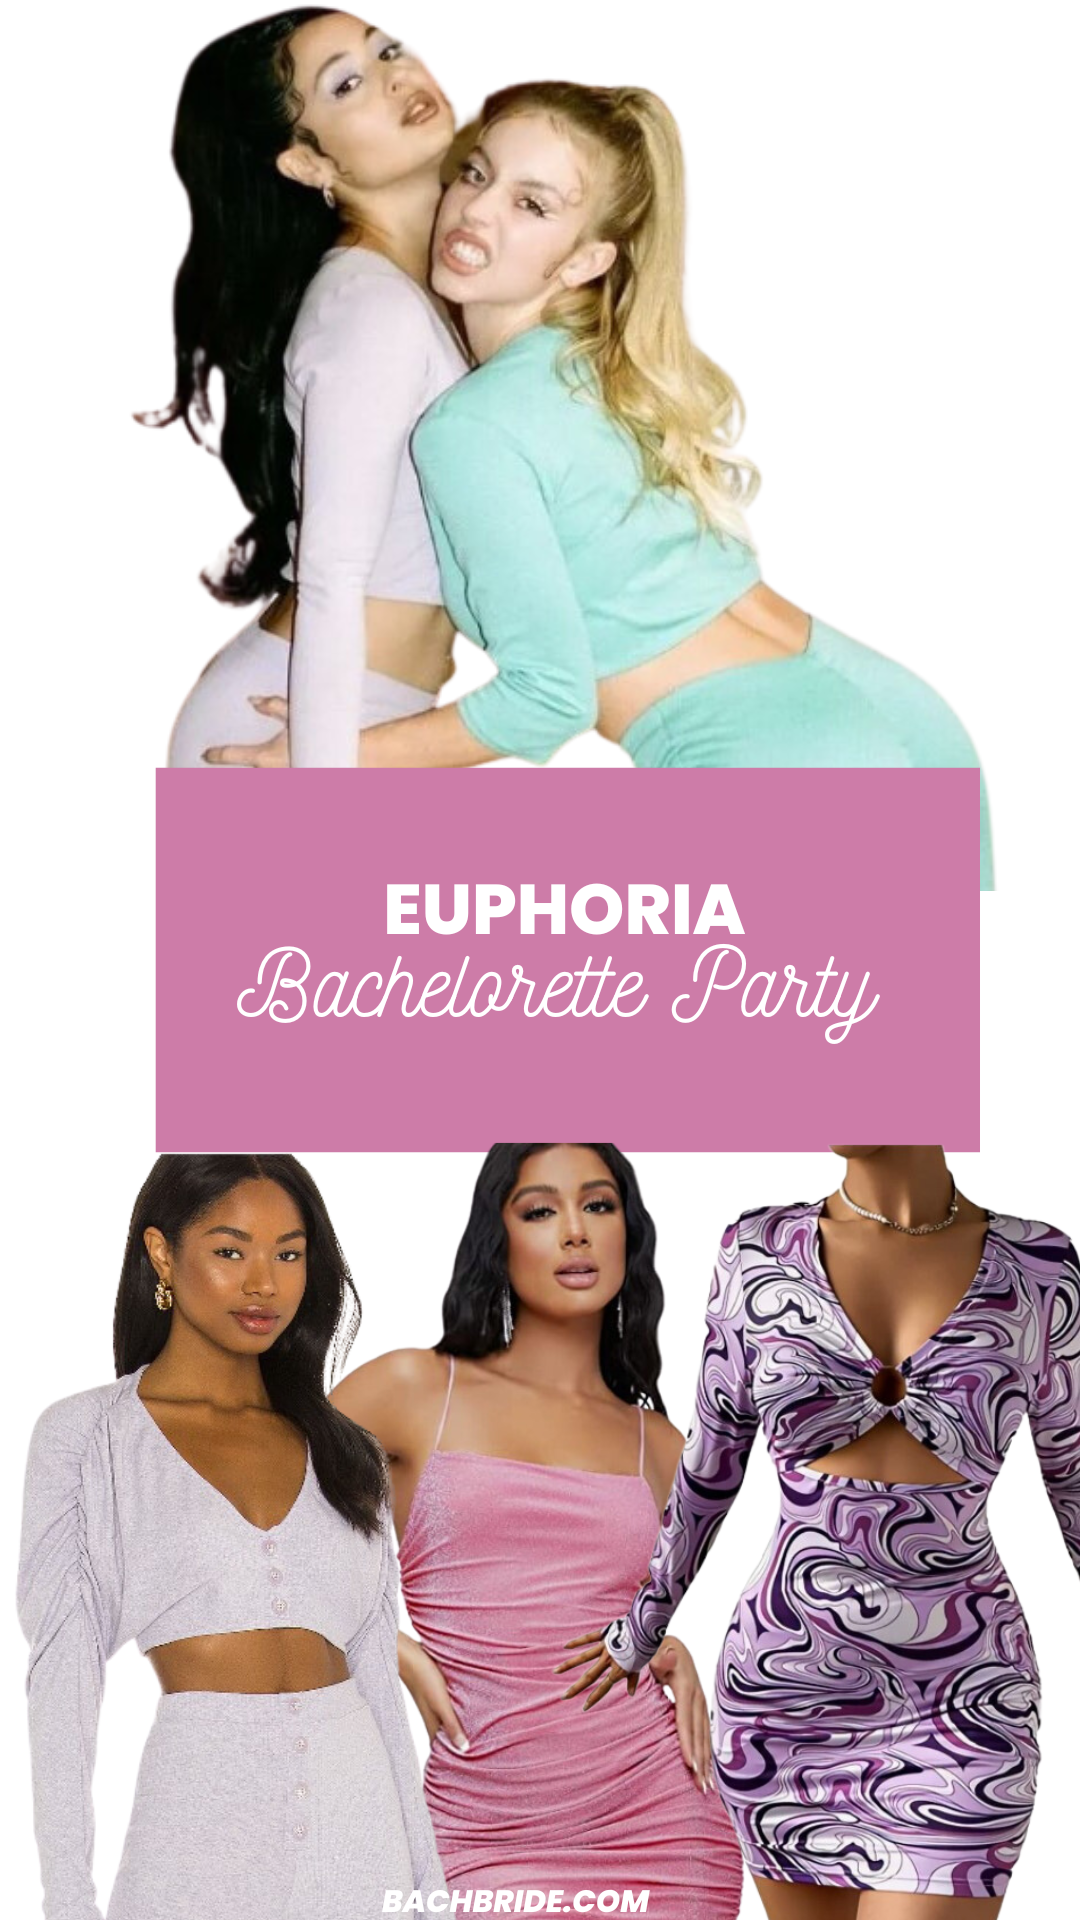 Best Euphoria Themed Party Ideas [Including Euphoria Outfits For